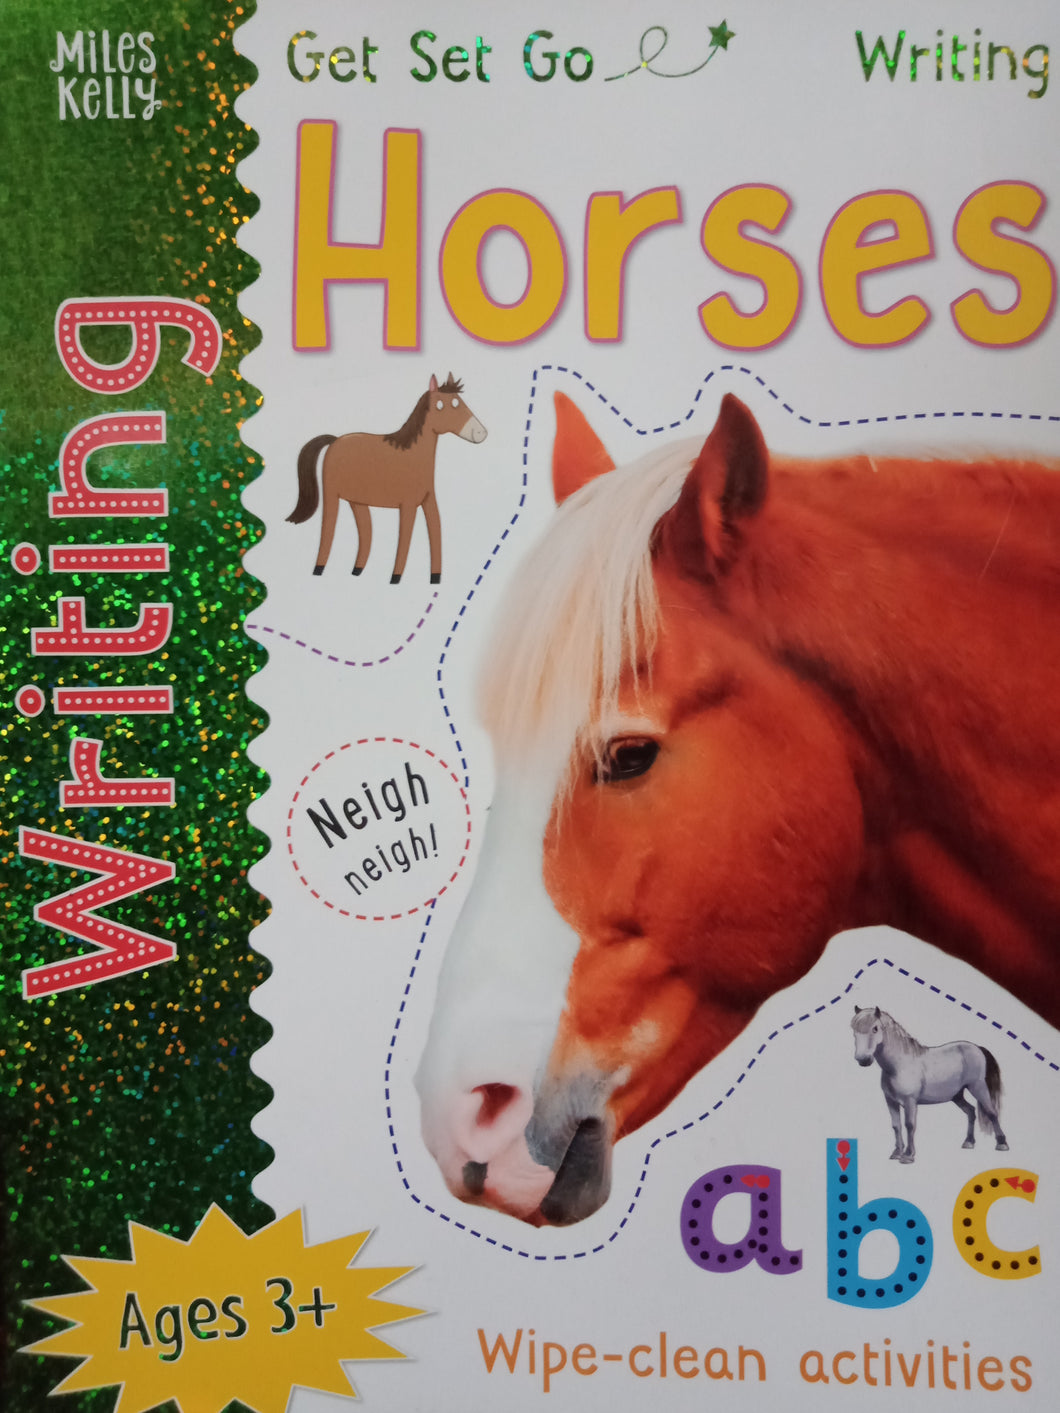 Writing Horse by Miles Kelly - Books for Less Online Bookstore